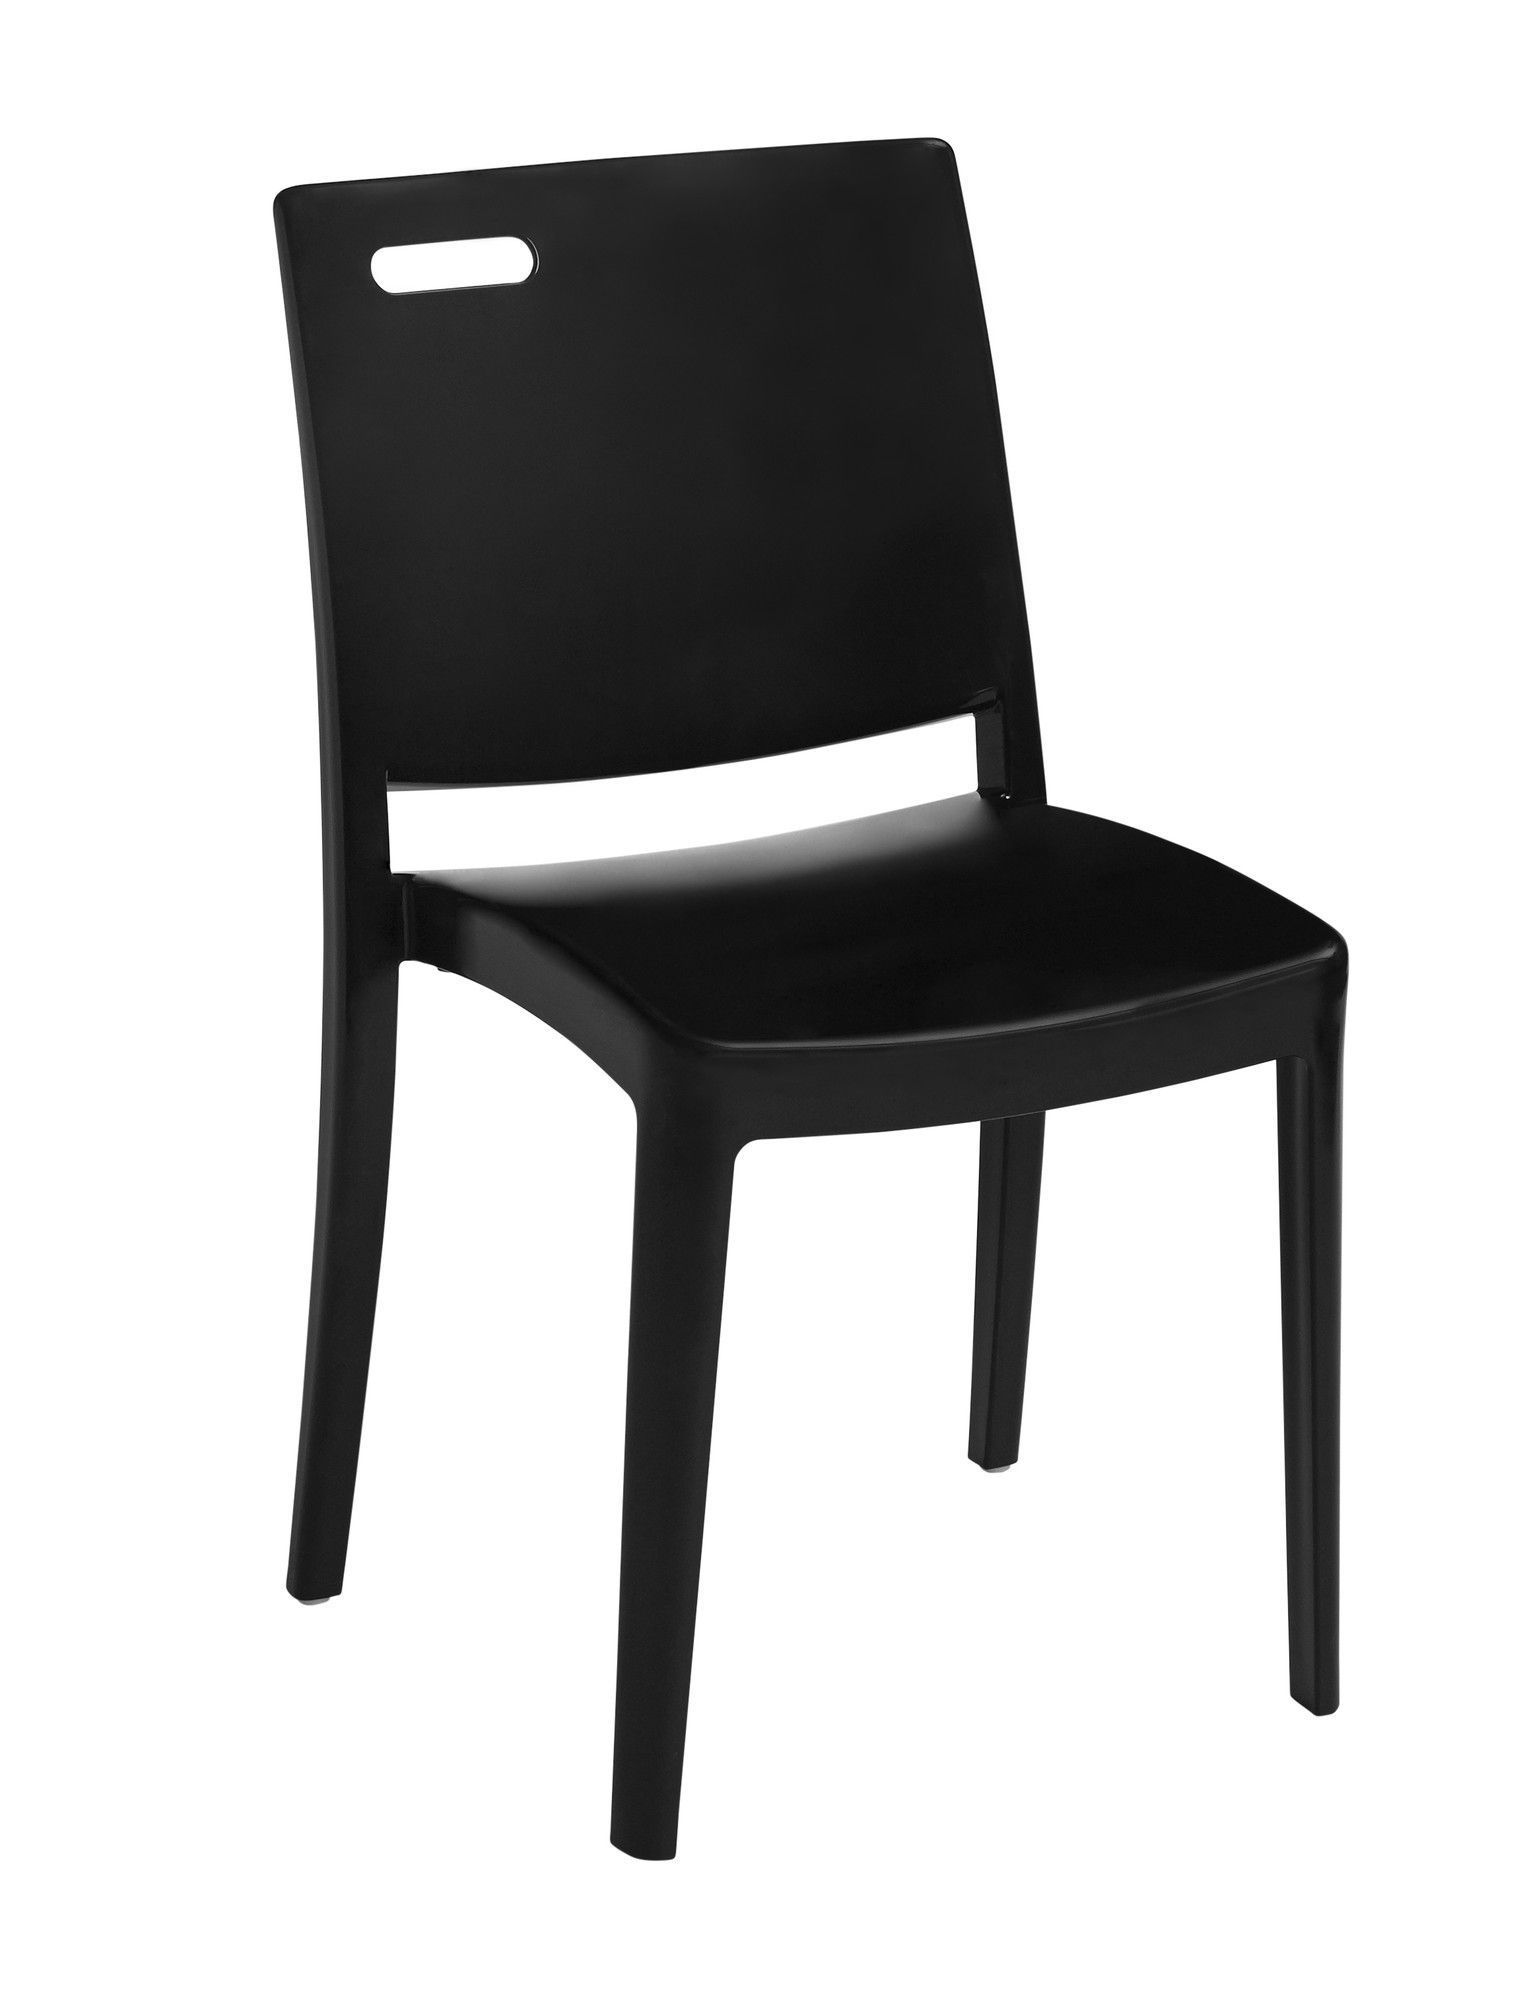 Metro Stacking Patio Dining Chair | Contemporary Outdoor Dining Chairs For Metropolitan Outdoor Dining Chair Sets (View 6 of 15)